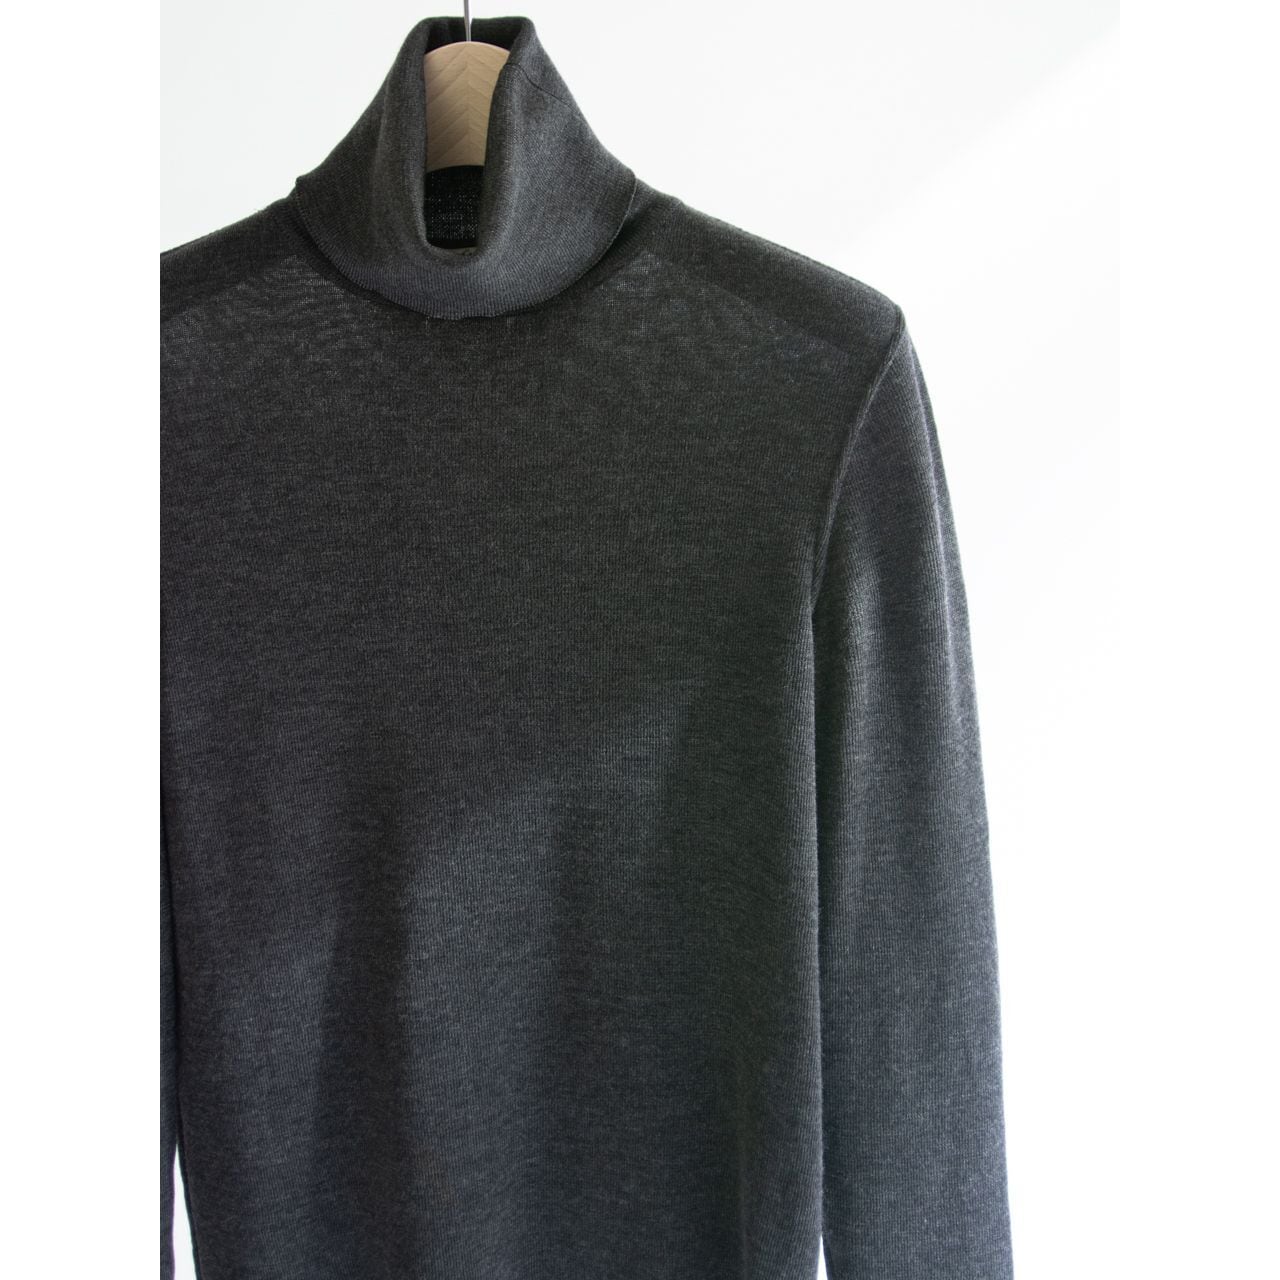 YVES SAINT LAURENT rive gauche】Made in France High Neck Knit